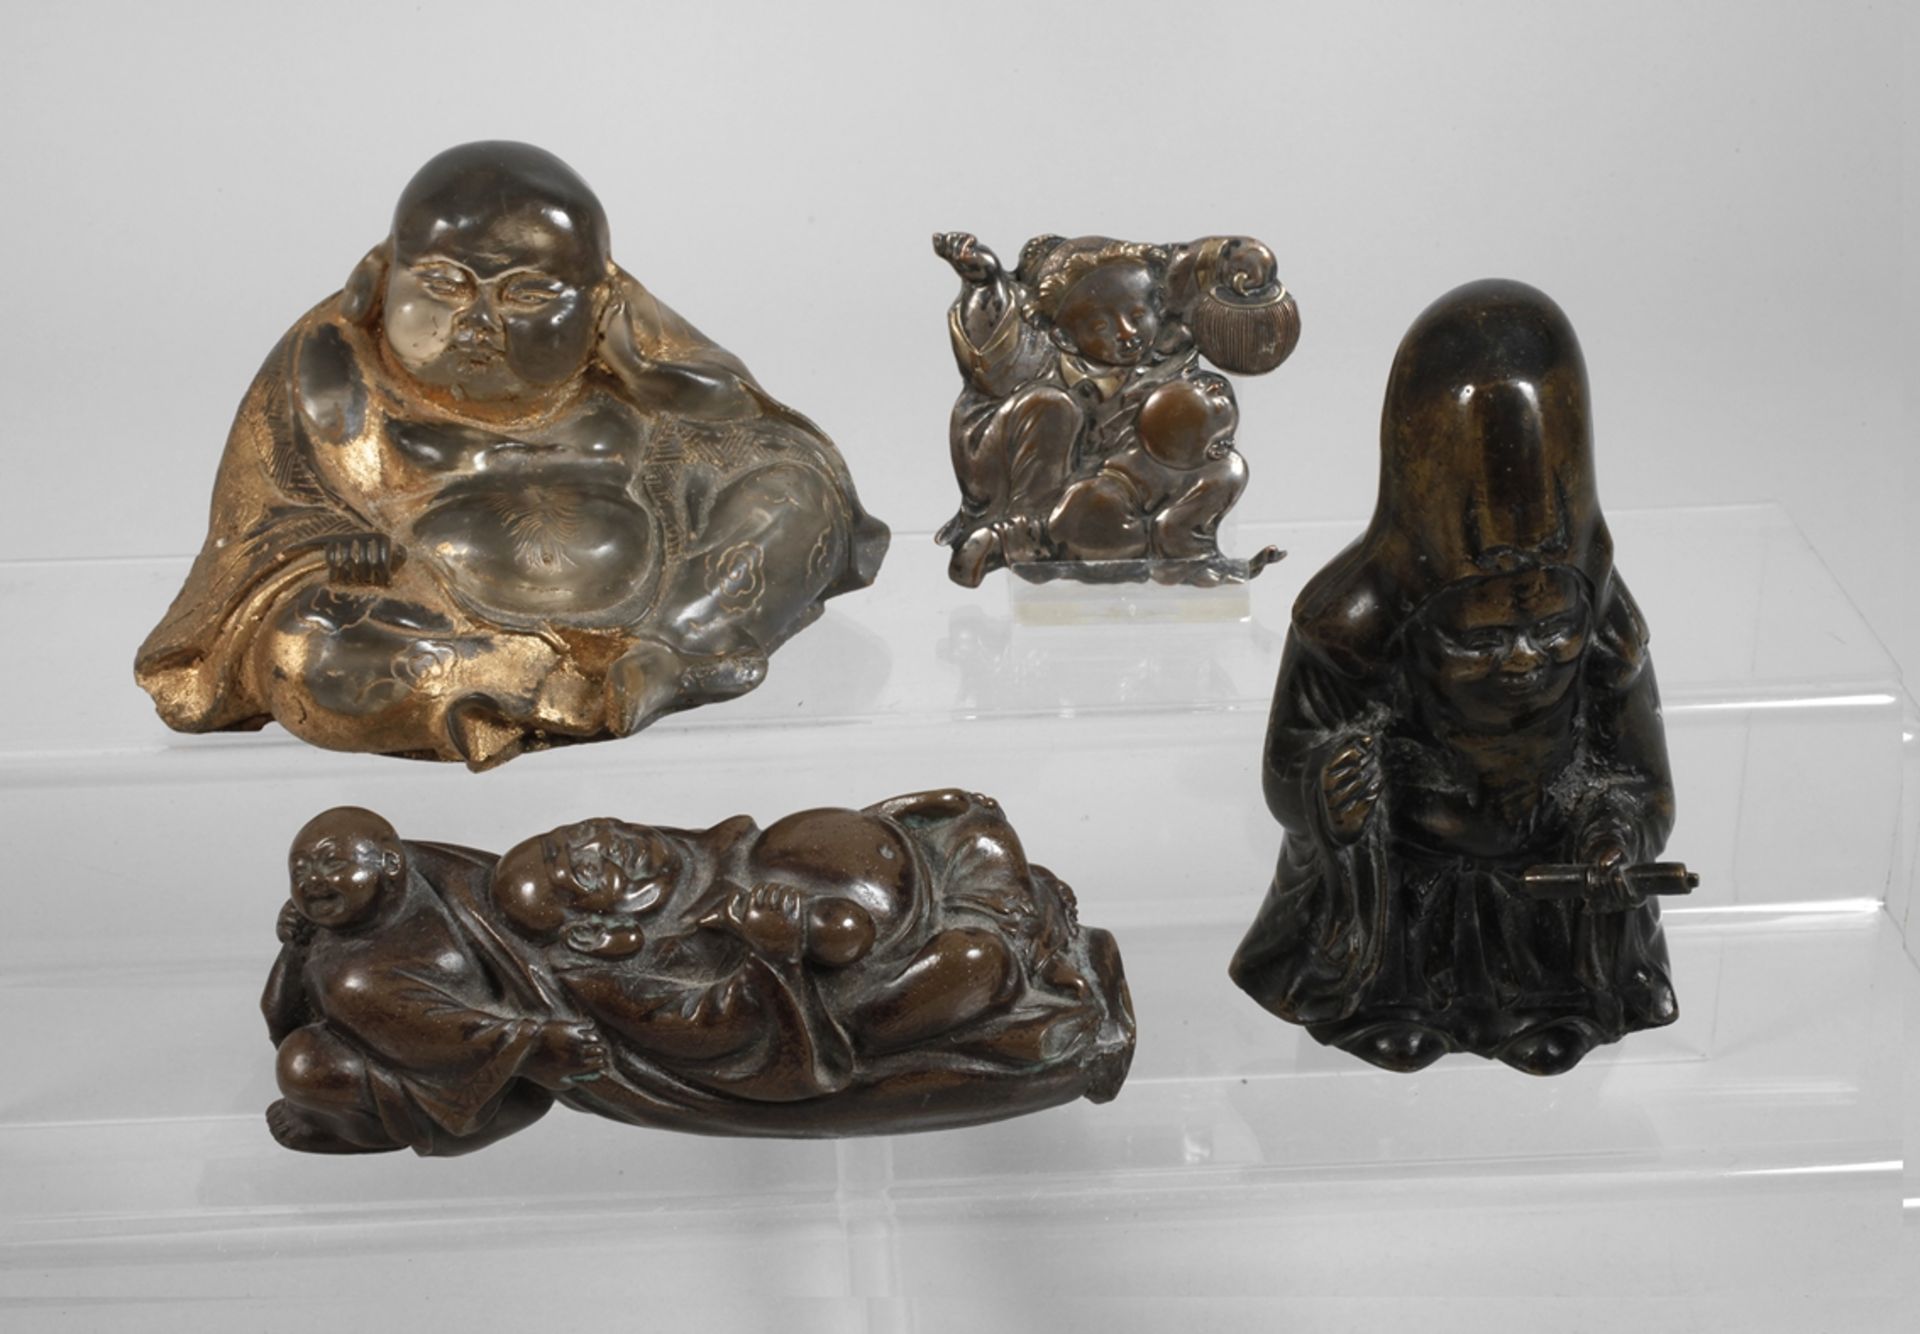 A collection of Asian figurines